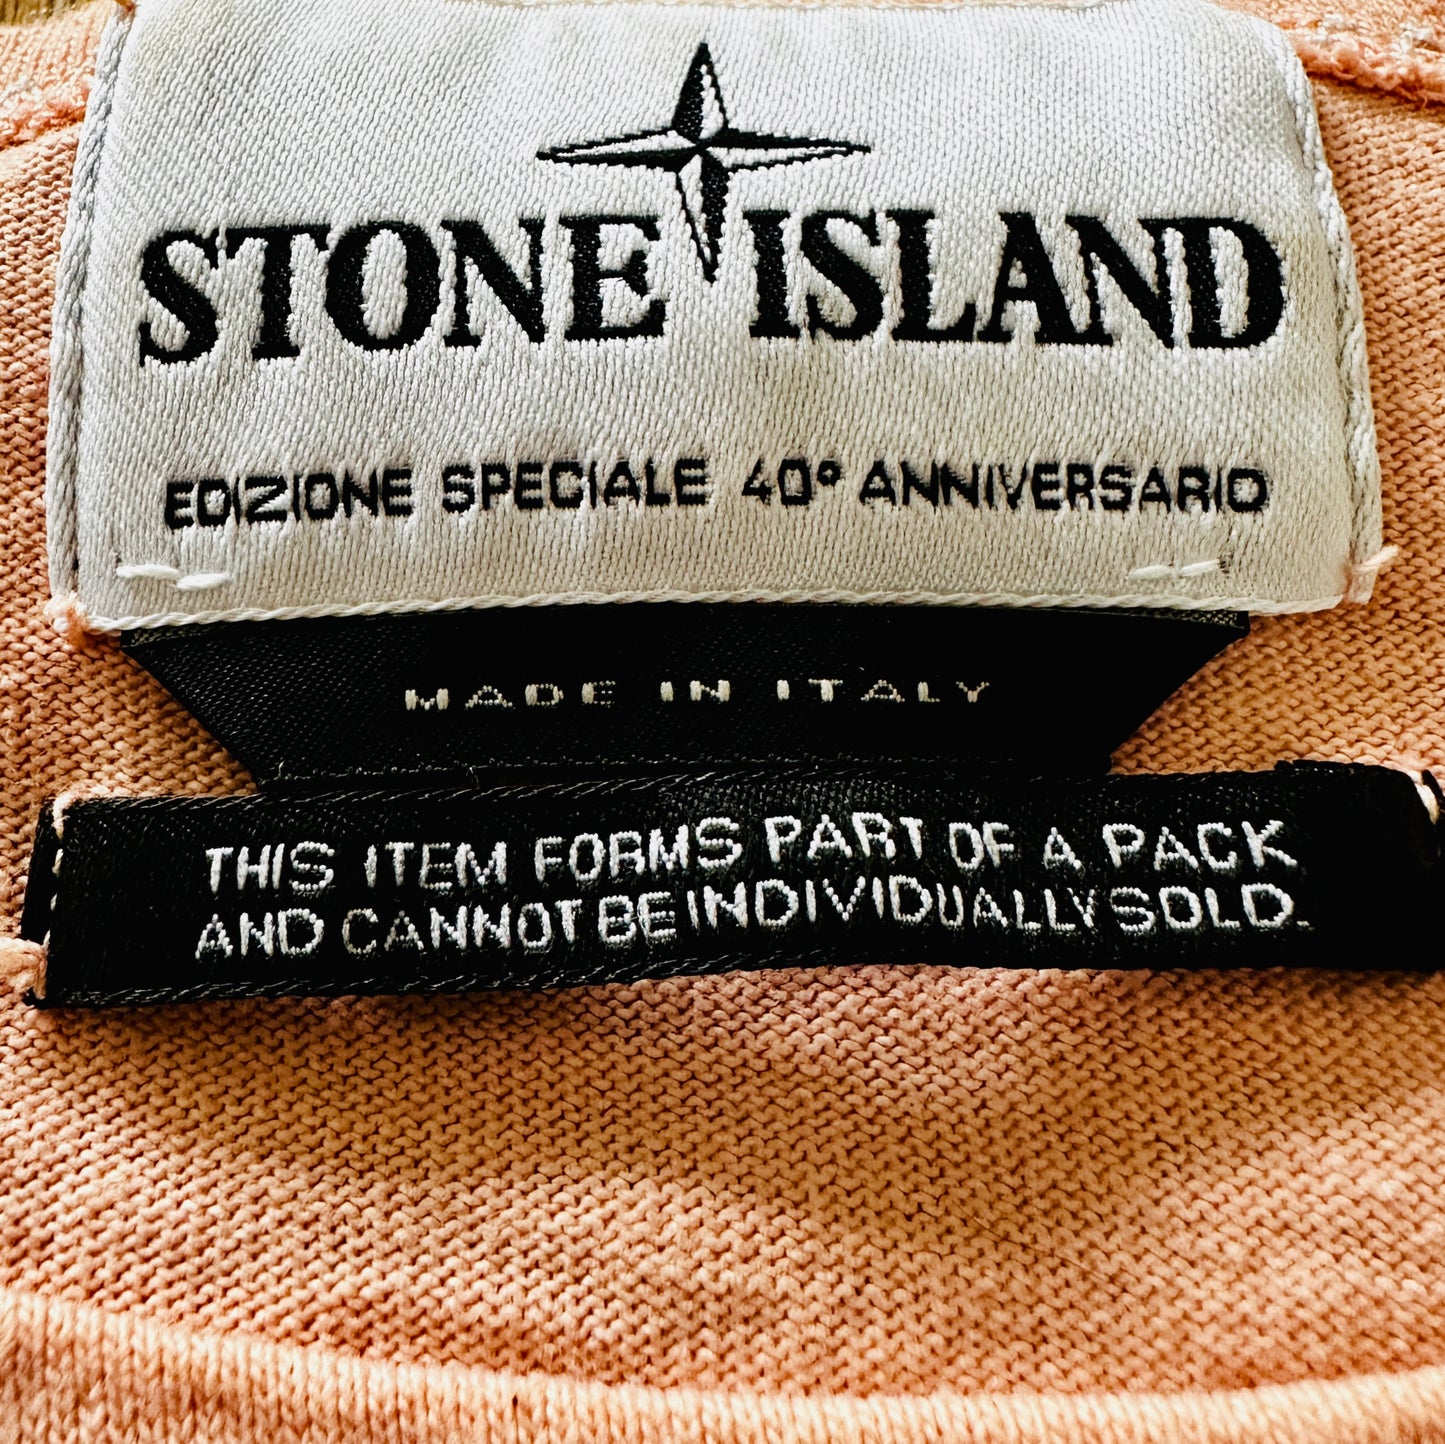 Stone Island Marina 40 Anni Kit Special Edition T-Shirt  - XXL - Made in Italy